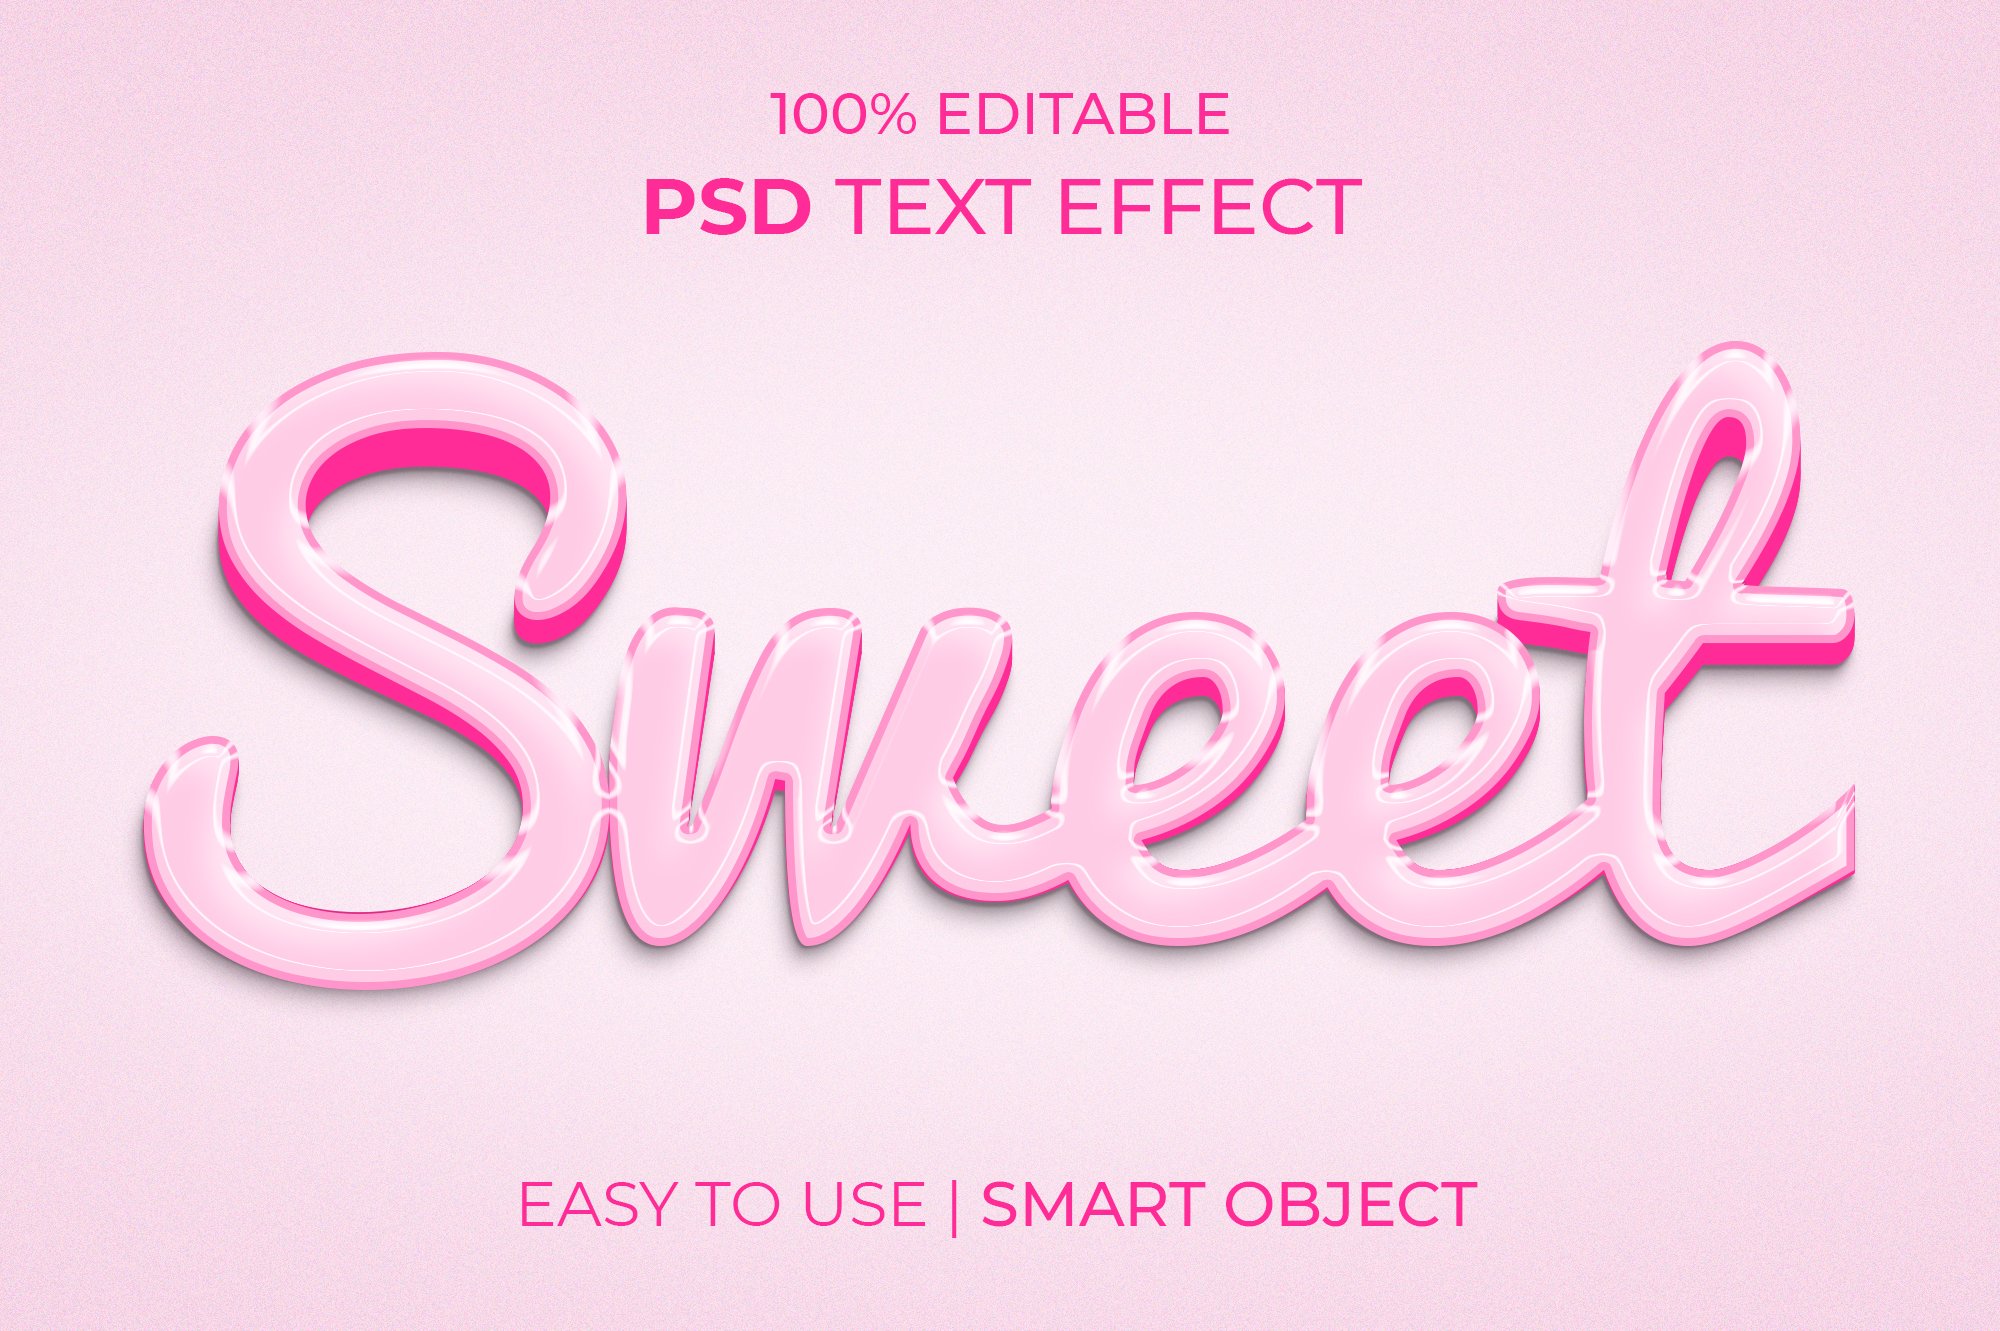 Sweet 3d text effectcover image.